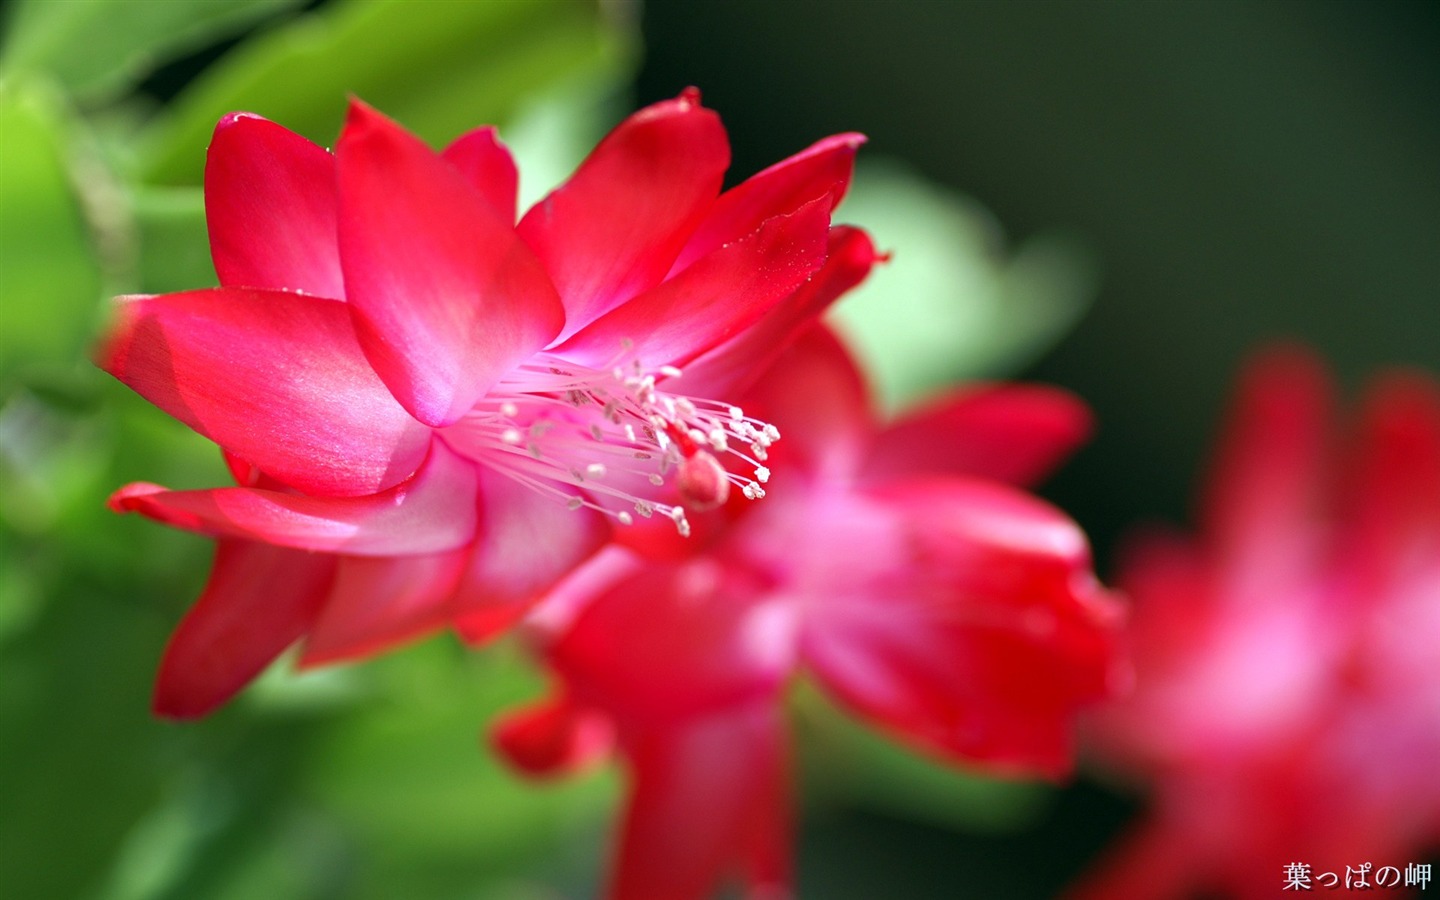 Personal Flowers HD Wallpapers #30 - 1440x900